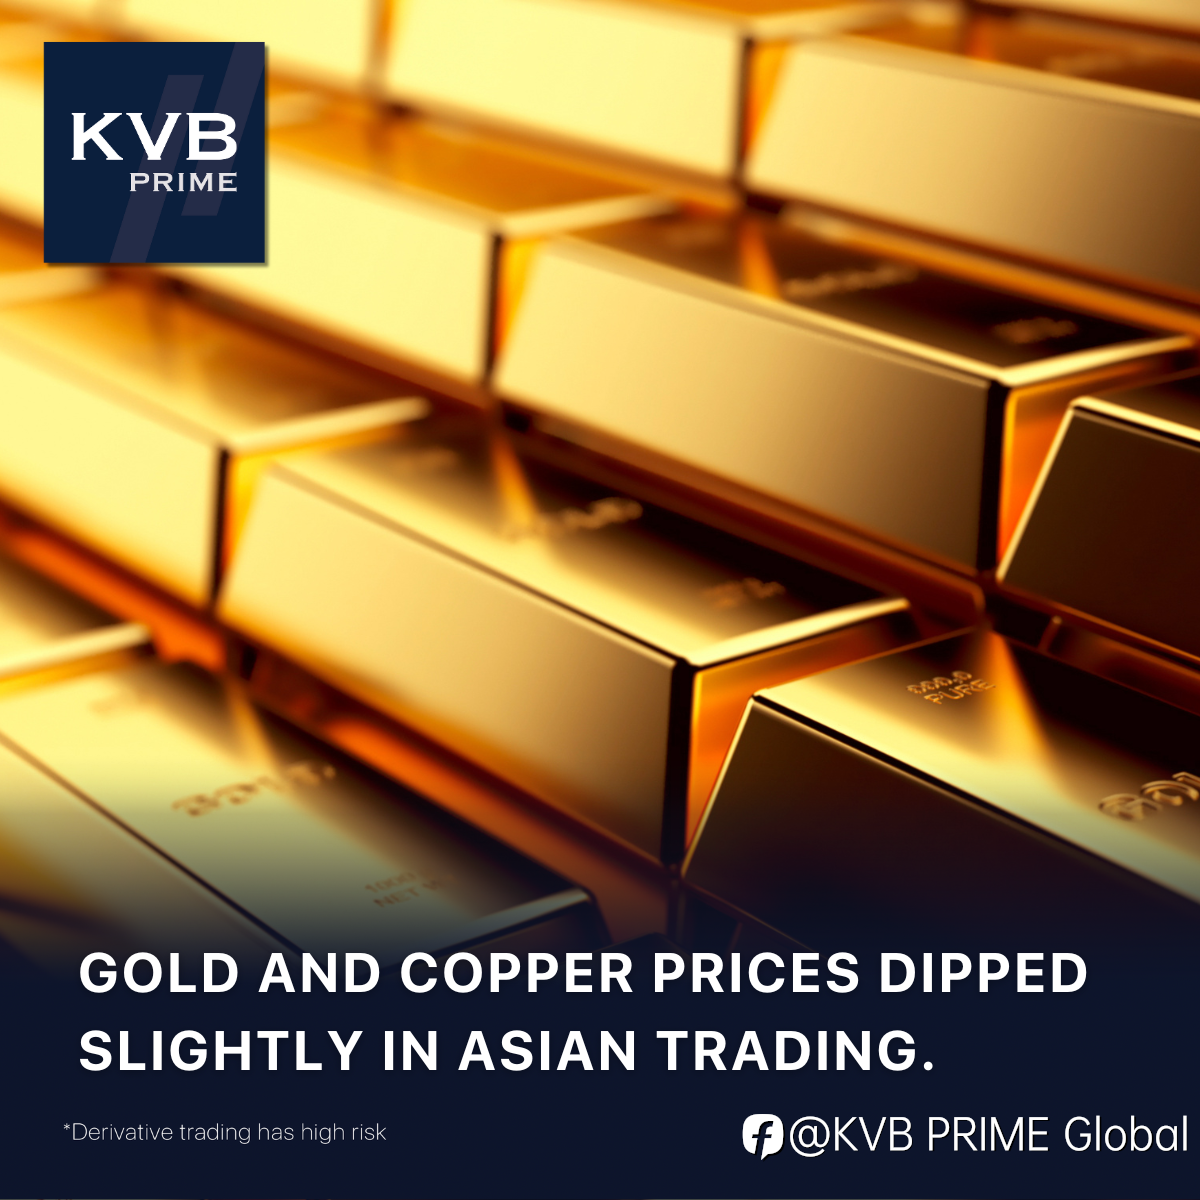 Gold and copper prices experienced a slight pullback in Asian trading.